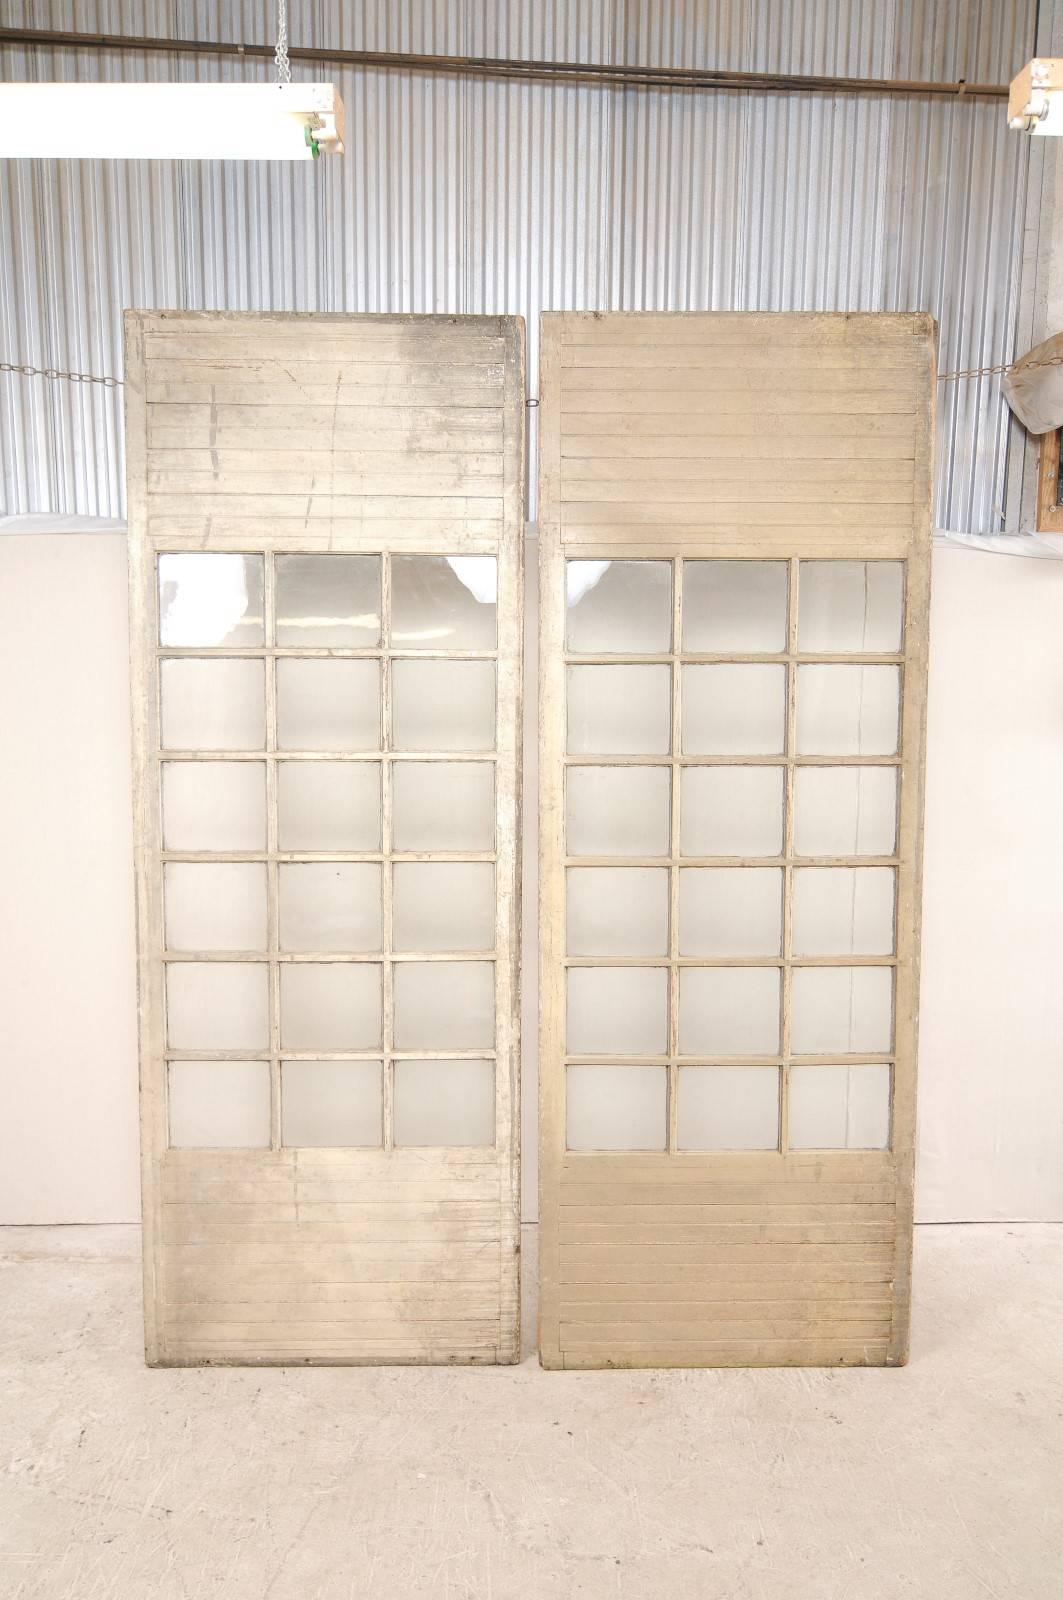 This is a pair of over-sized French doors from the early 20th century. These antique French doors are substantial, standing at a height of more than 10 feet! Each door has 18 glass panels, framed by vertically slatted wood at the upper and lower